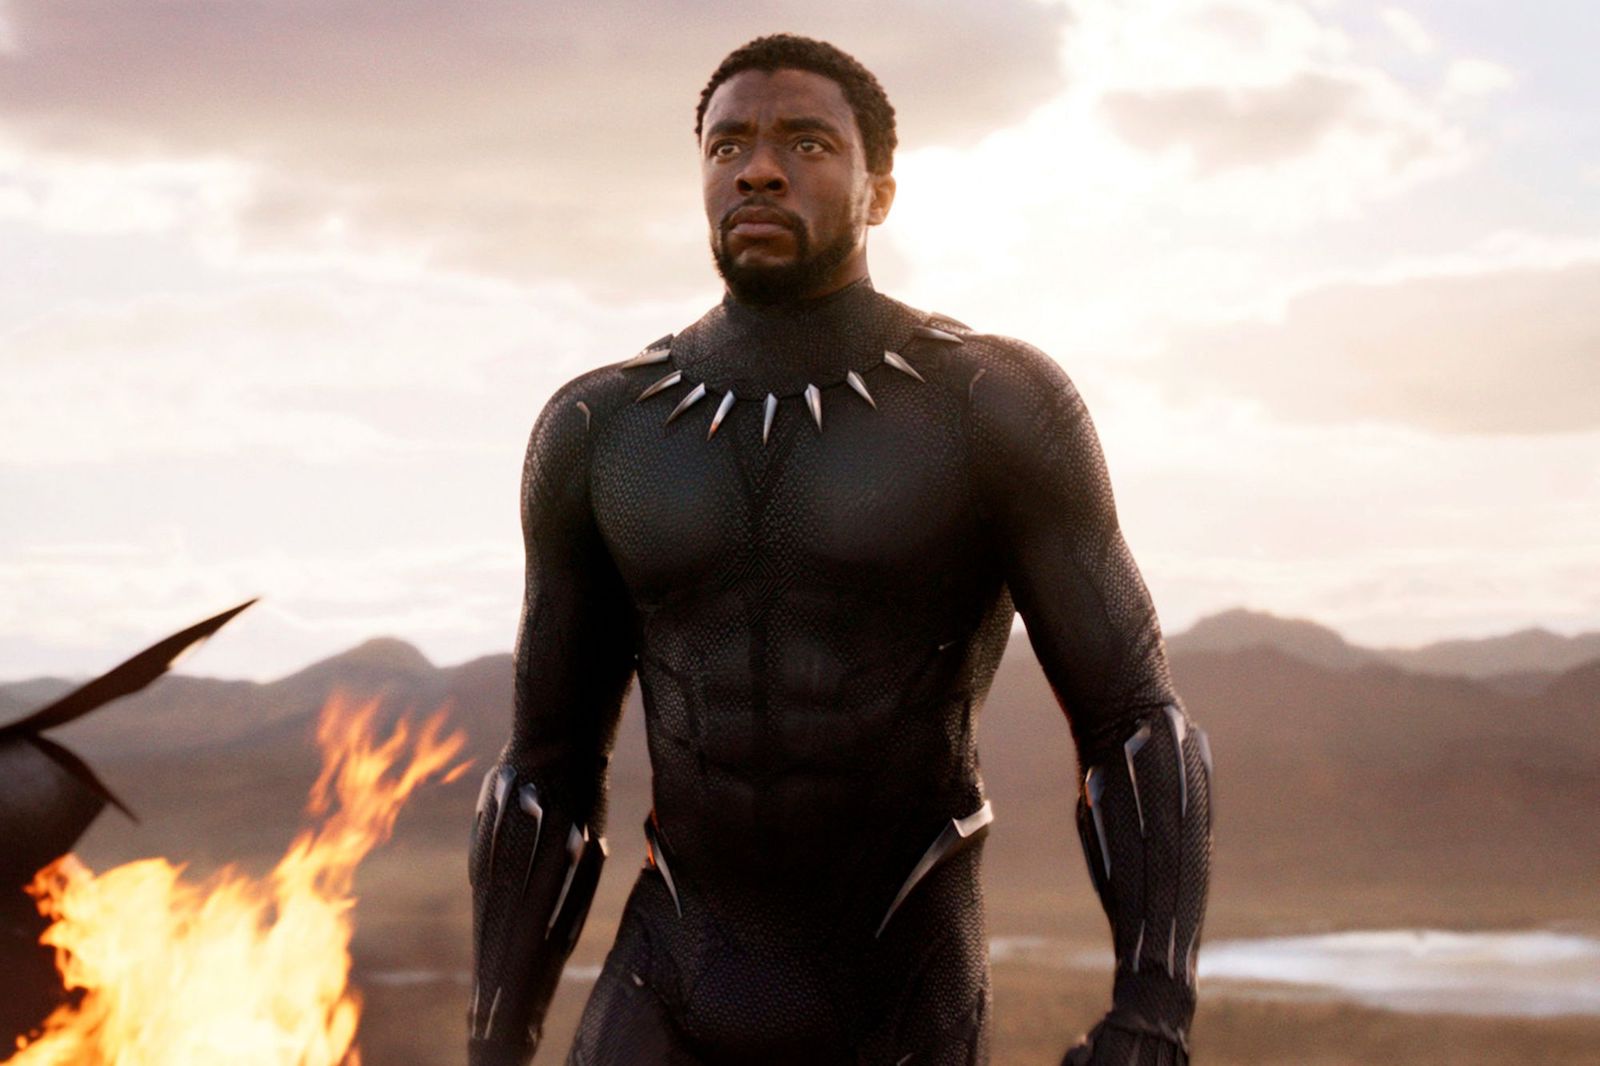 Chadwick Boseman has had numerous Oscar-worthy roles in movies, including two before his death in 2020. Could this be the year he wins an Oscar?